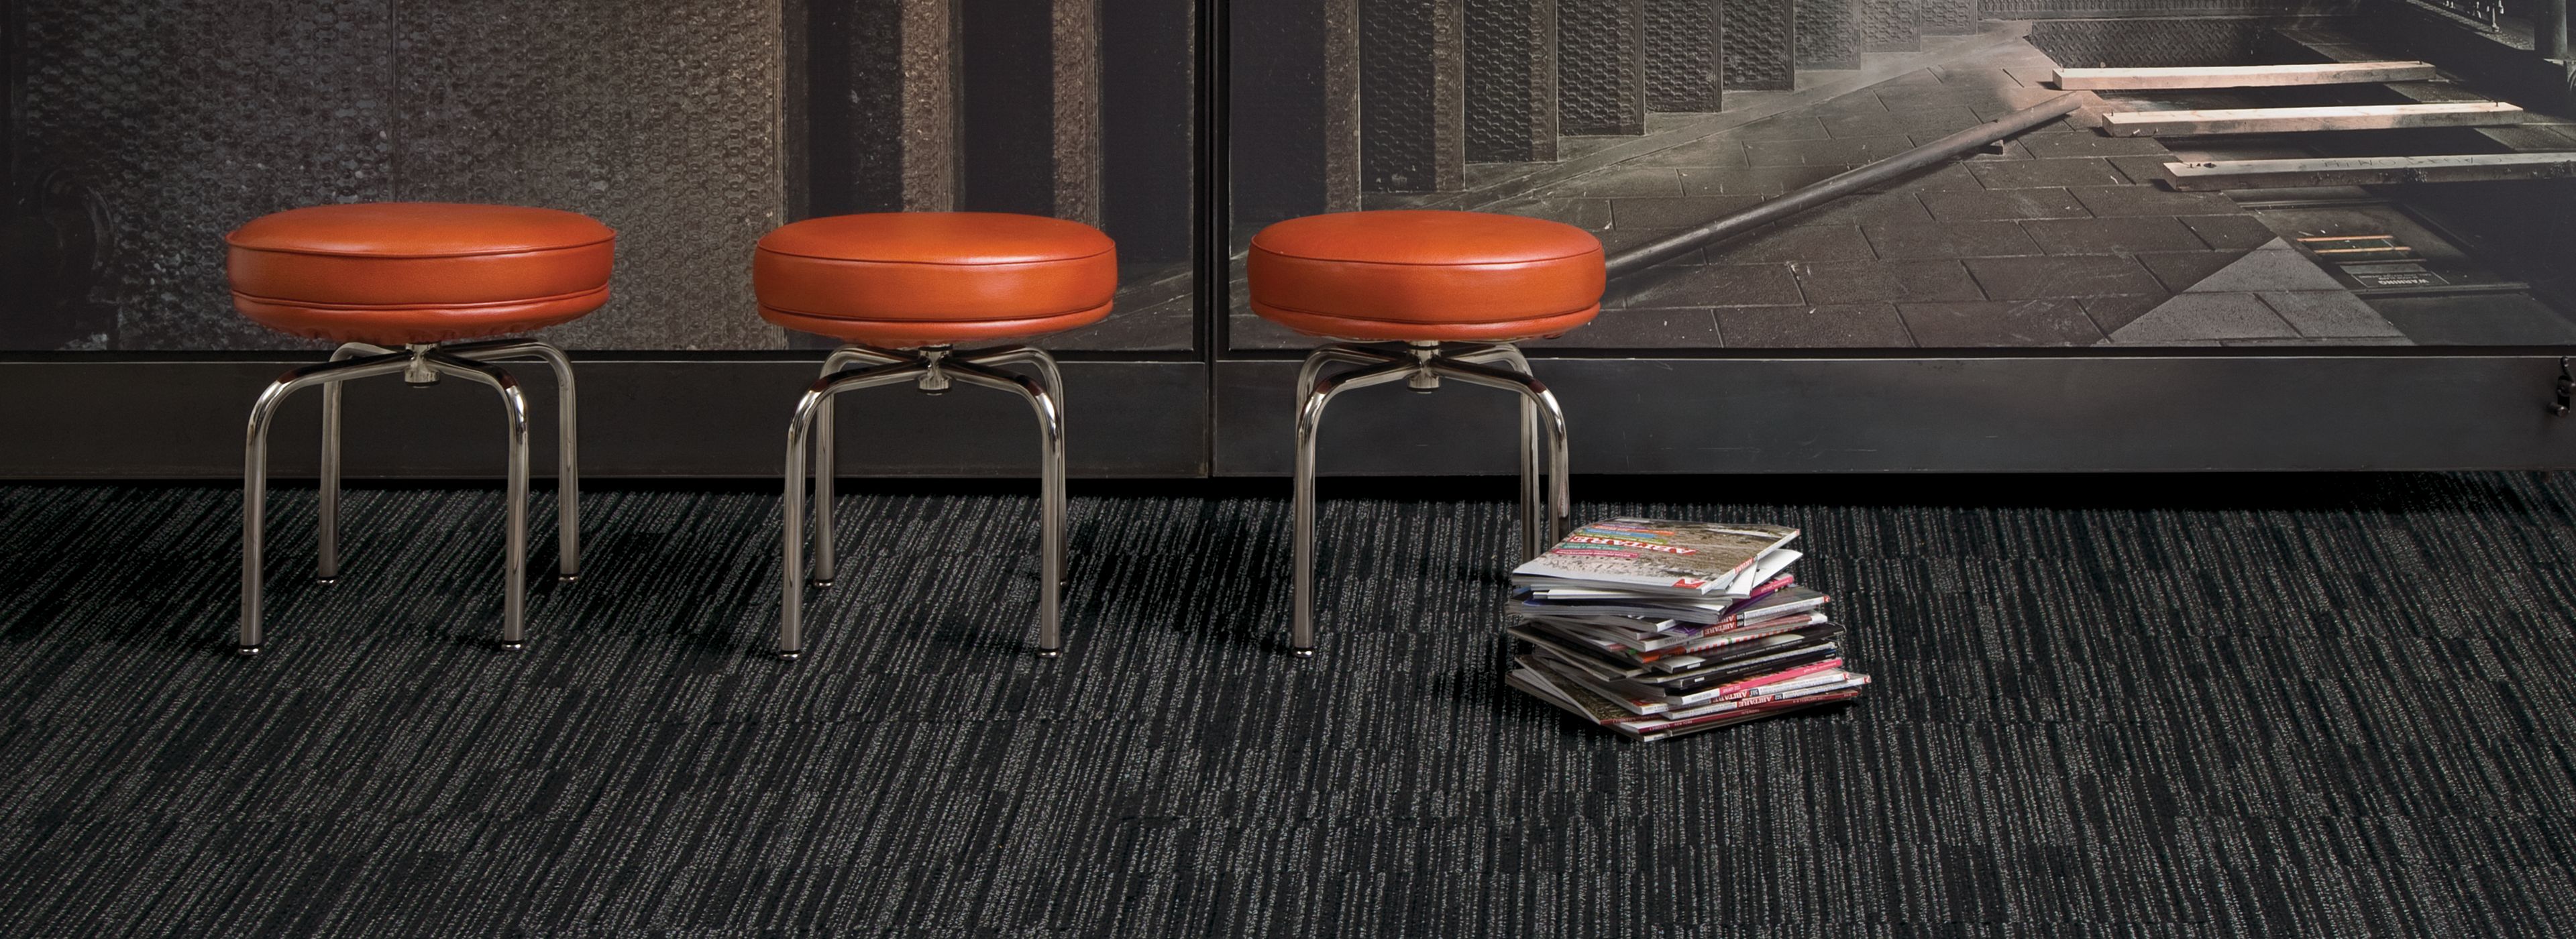 Interface CT102 carpet tile in open area with three red stools and stack of books image number 1